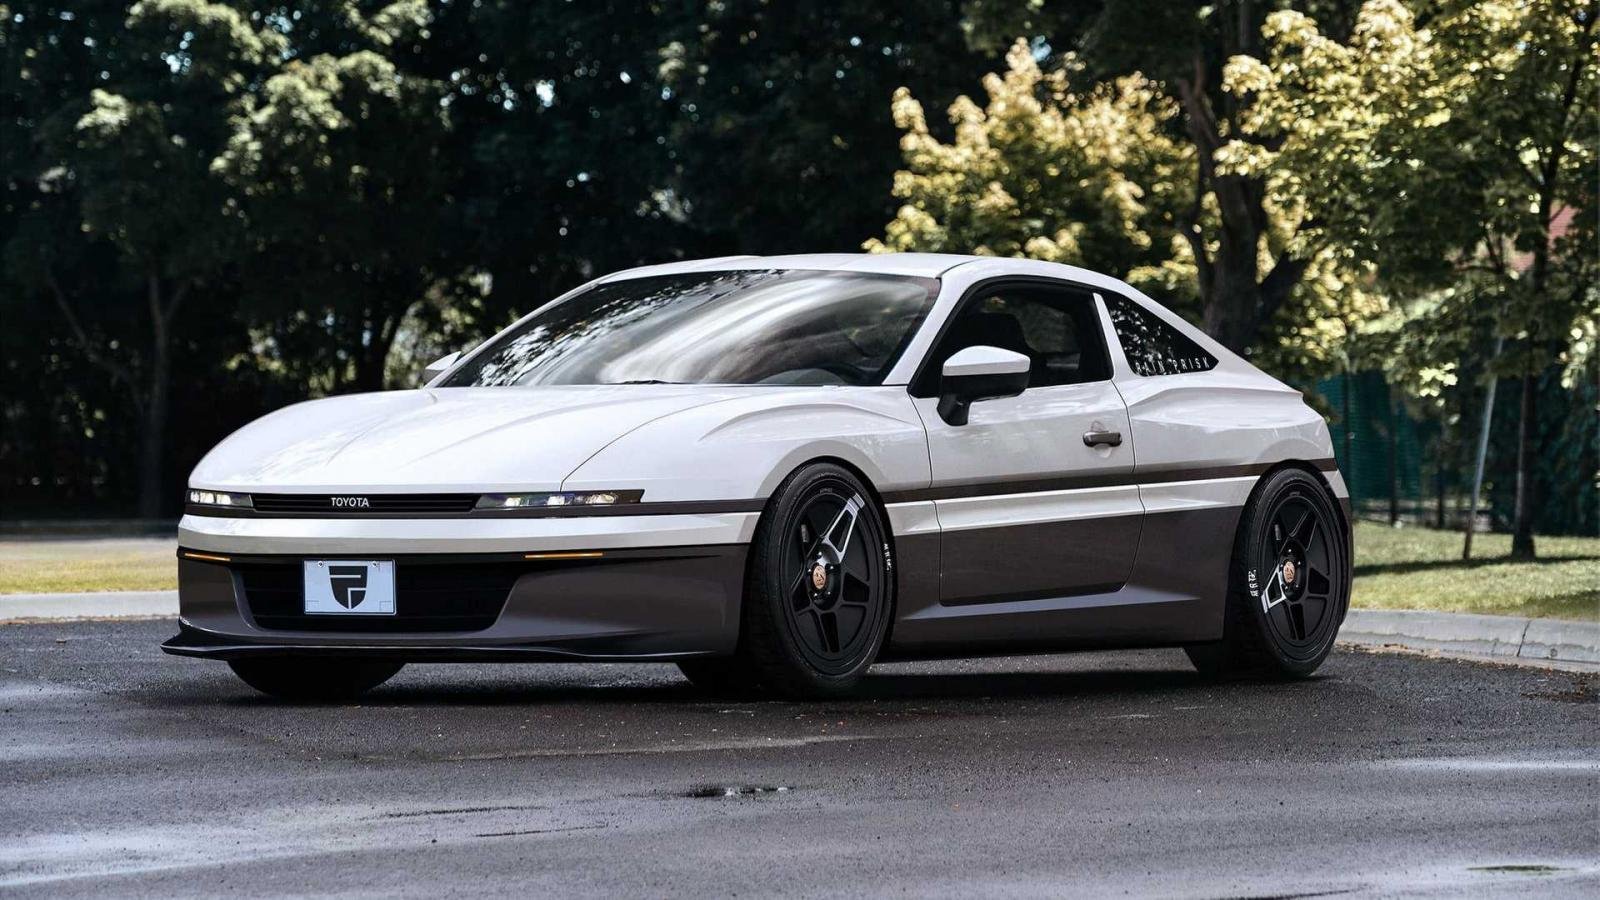 This Render Brings The Iconic Toyota AE86 To The 21st Century